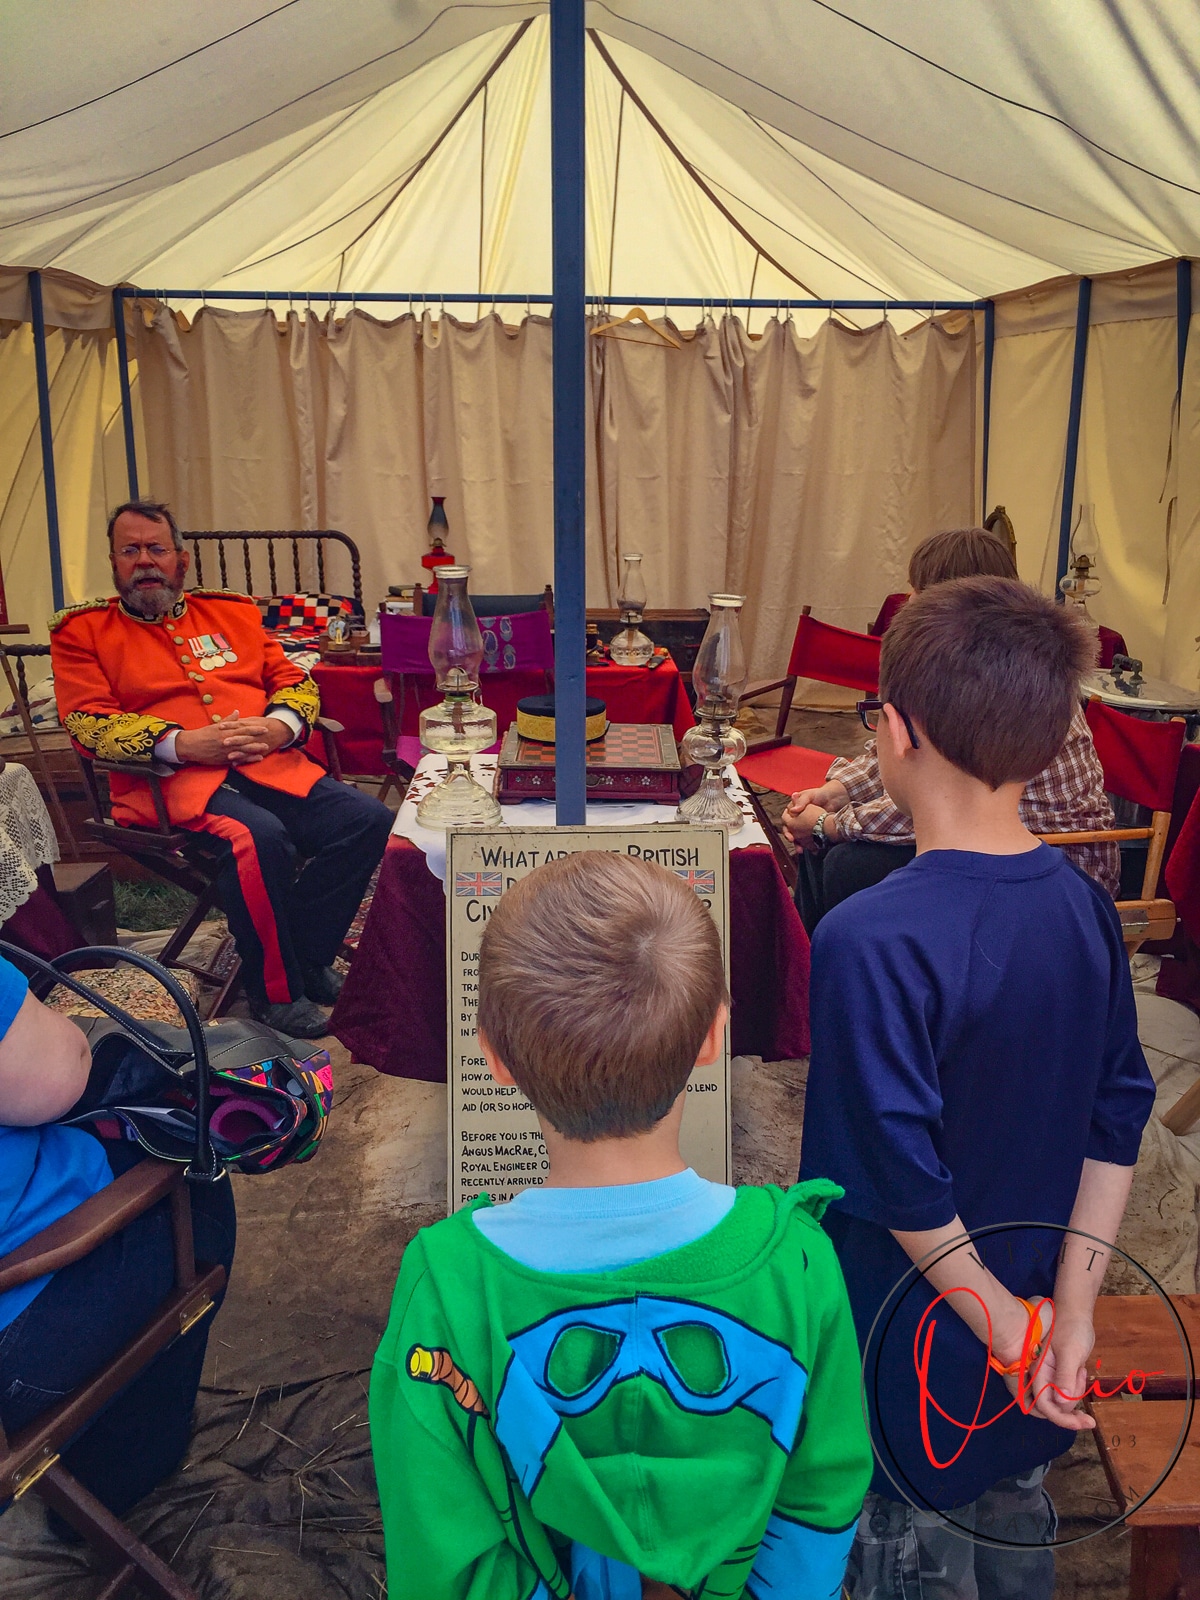 2 young children looking at a man in a red civil war coat in a tent telling a story